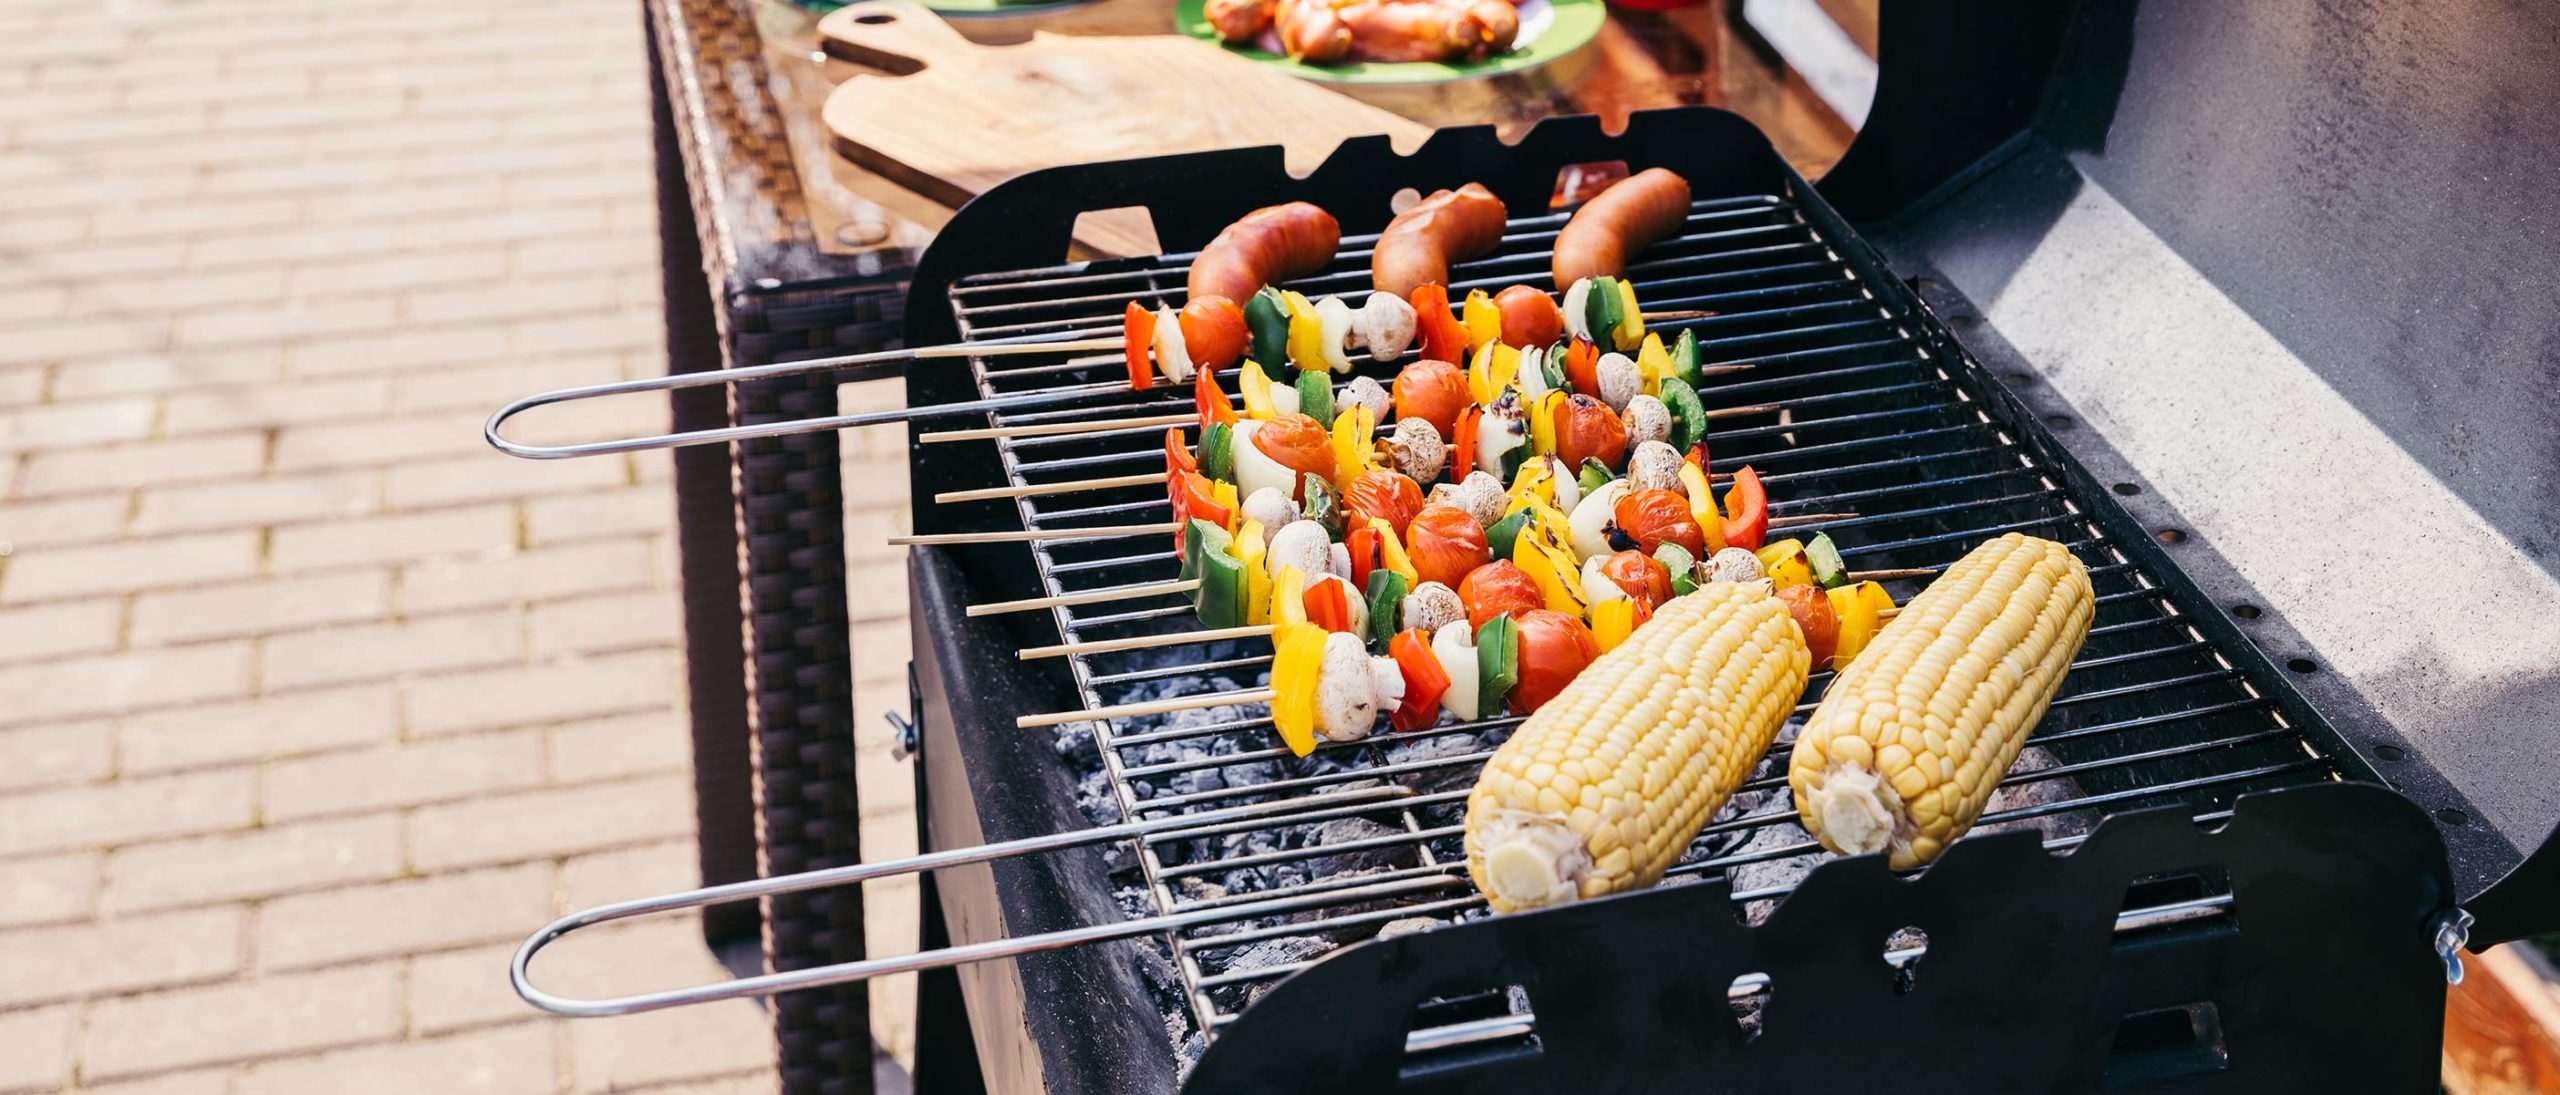 BBQ Grill Buying Guide: Compare Charcoal, Pellet, Gas, and Electric